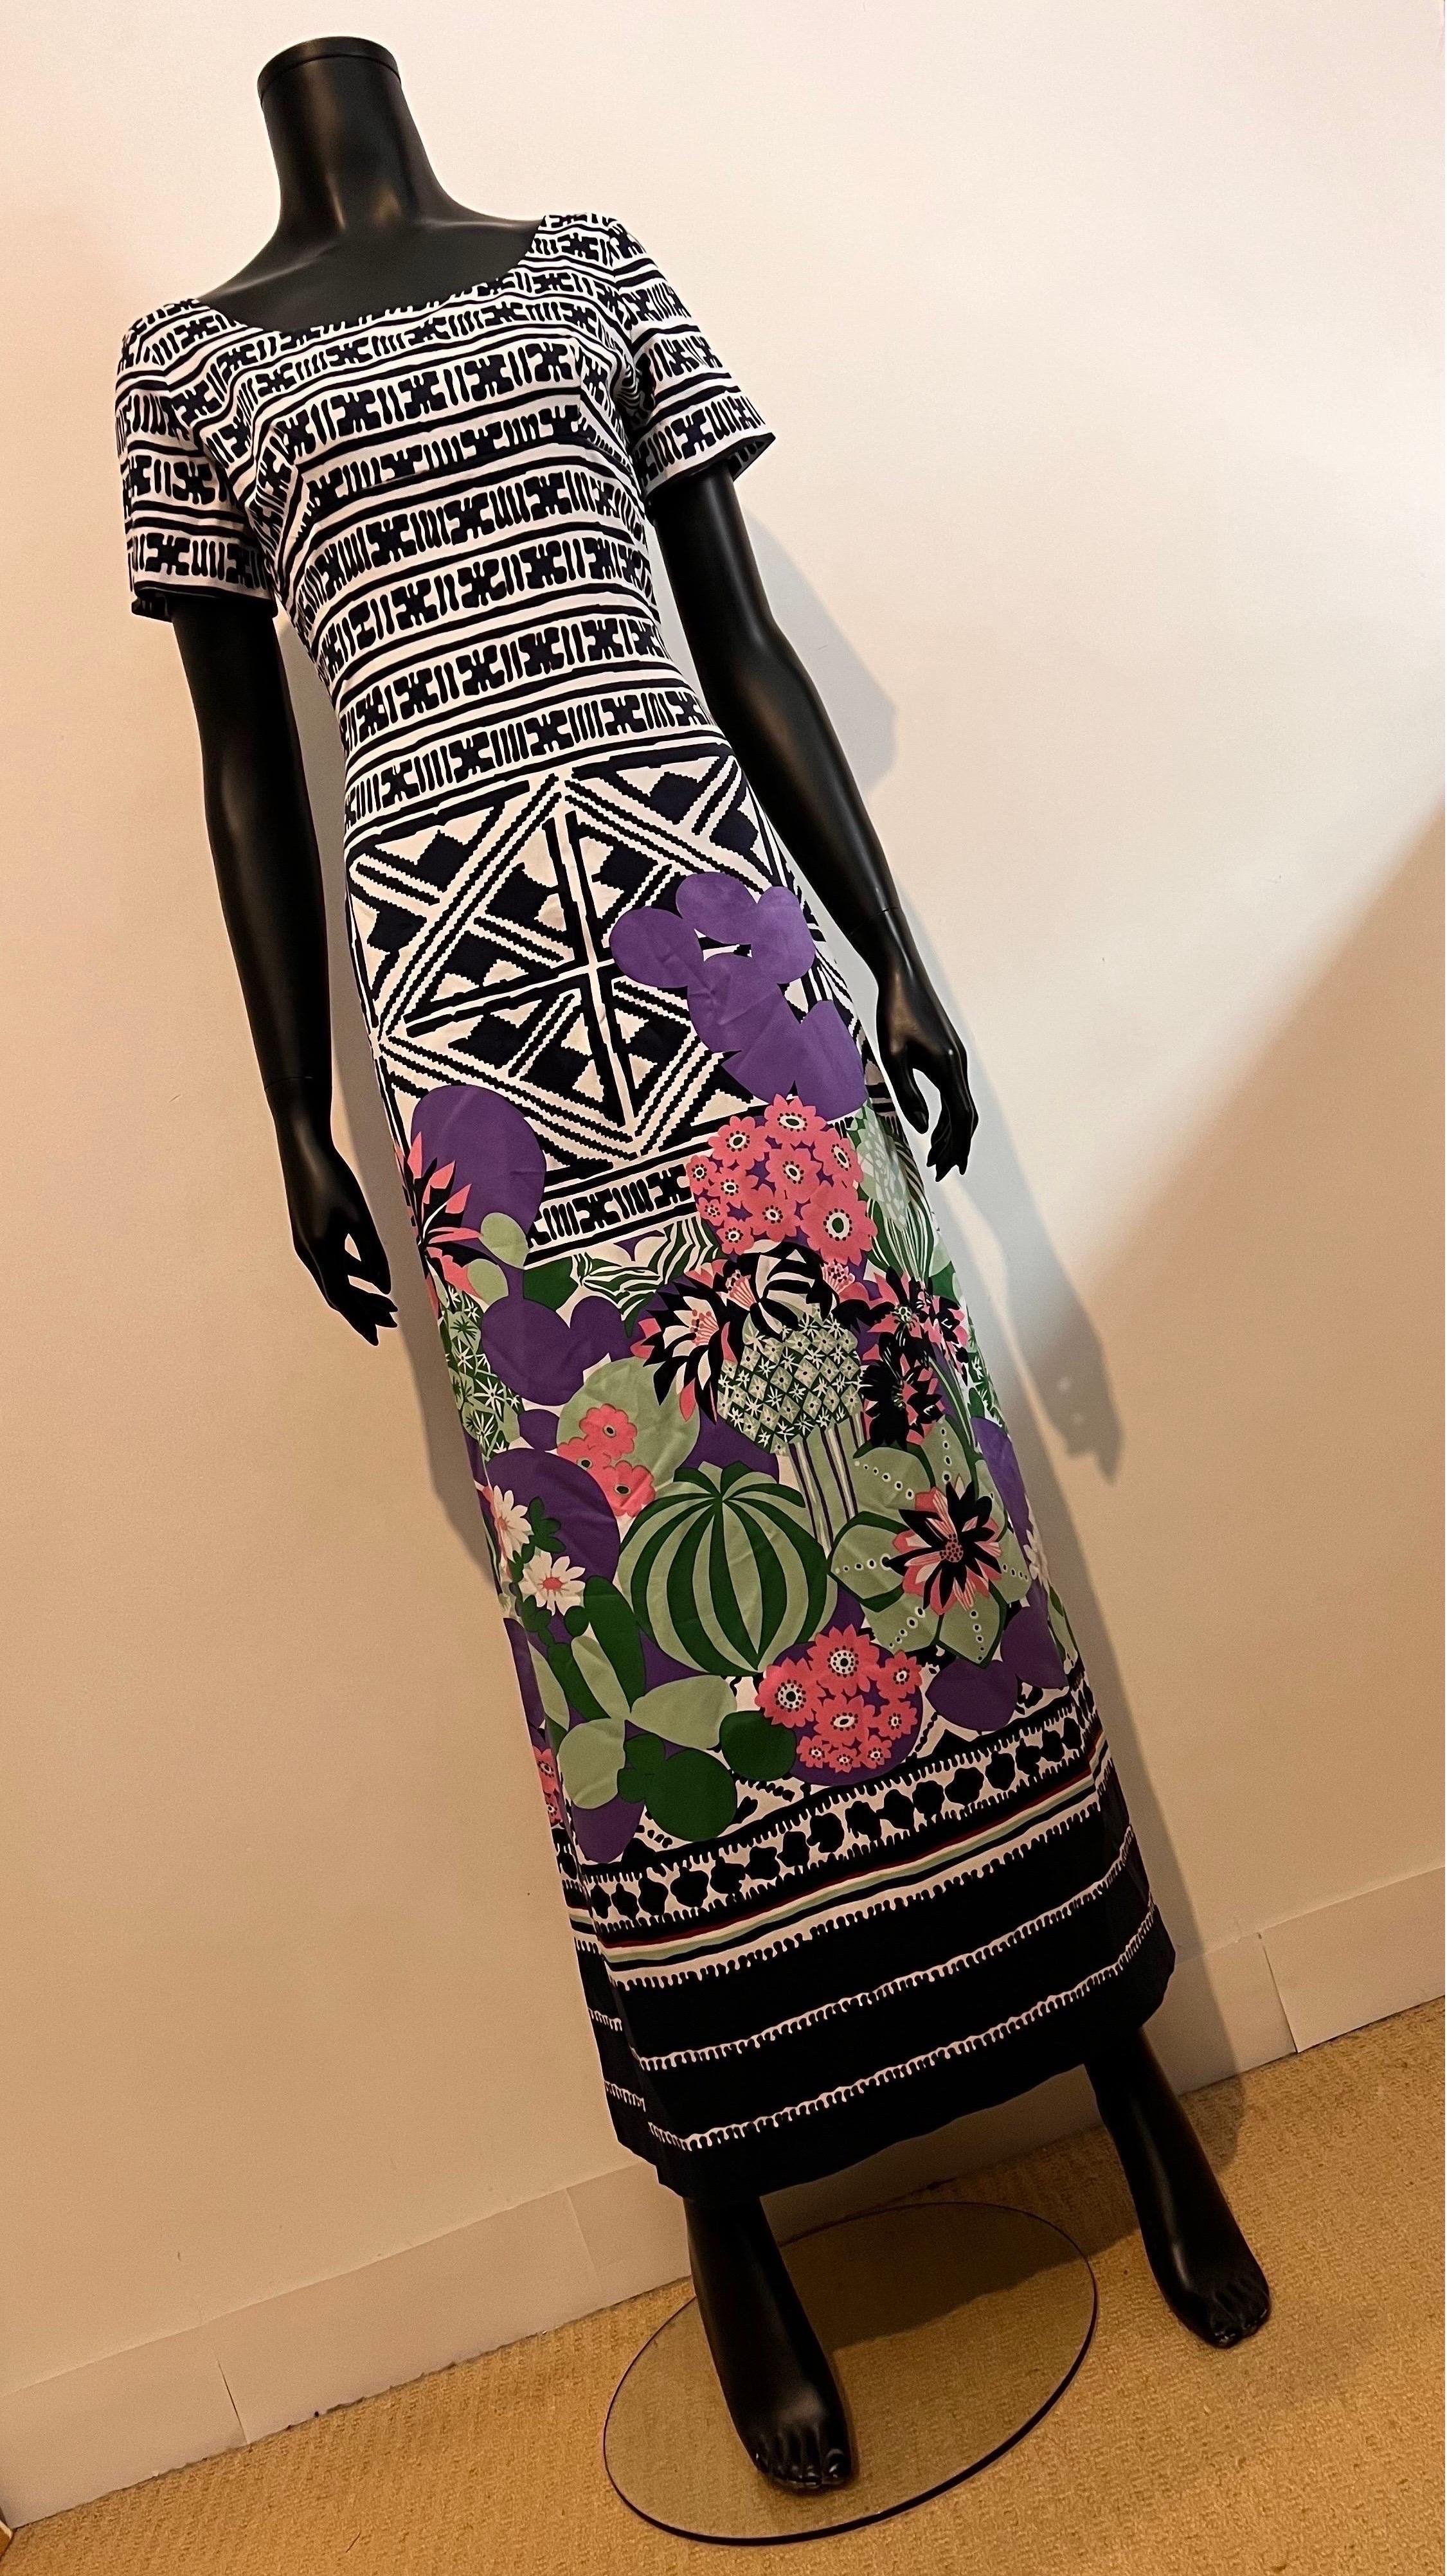 A wonderful example of a vintage 1970’s Lanvin Boutique abstract/floral patterned/print summer dress

A lovely dress for a spring/summer party or that special resort moment, it has a short sleeve with flattering squared off scoop neckline.

The